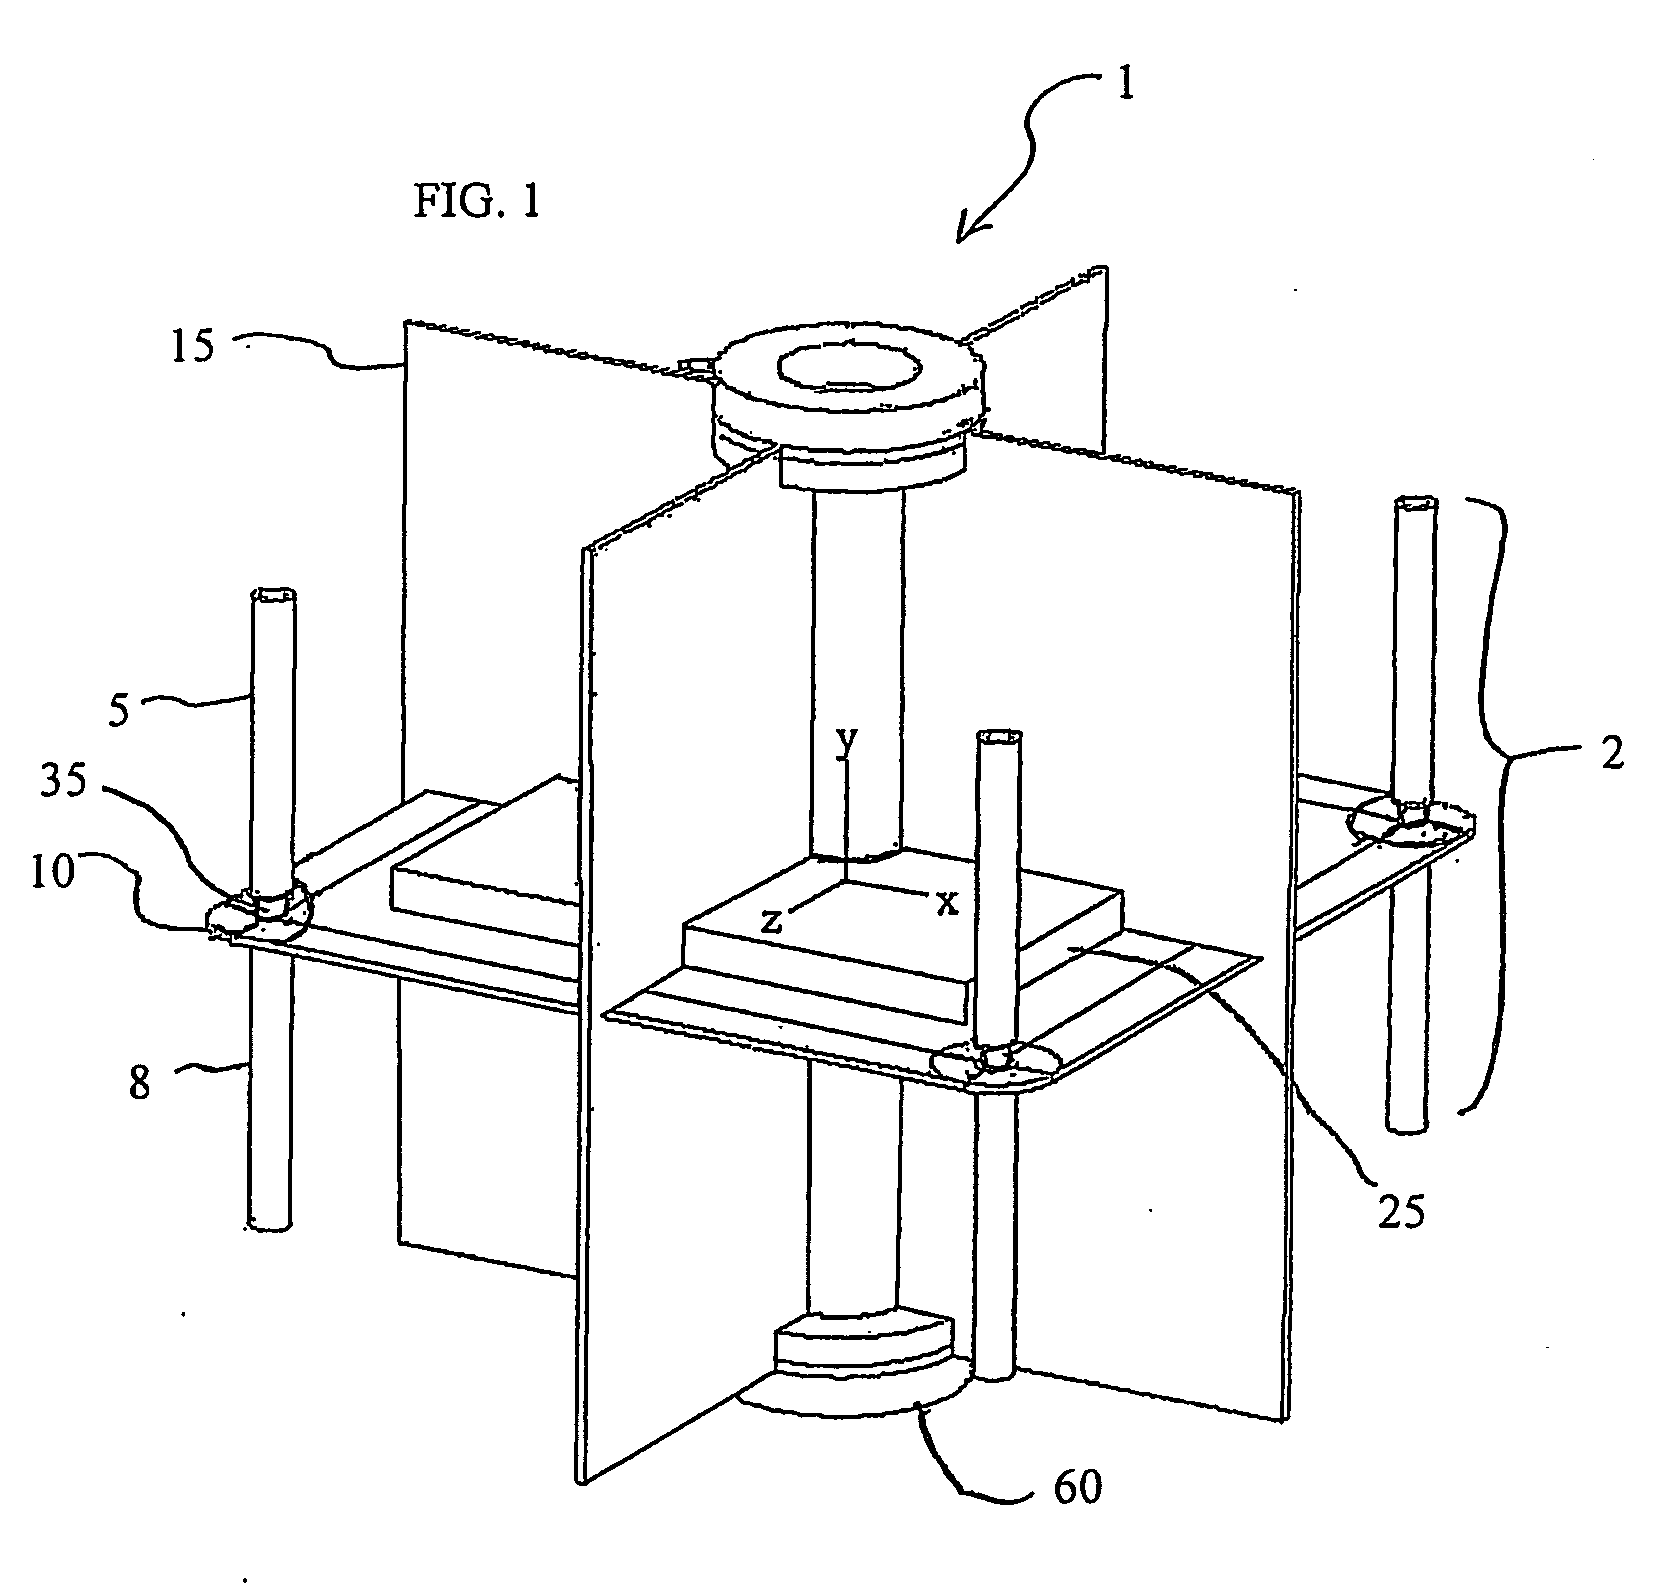 Dipole array with reflector and integrated electronics